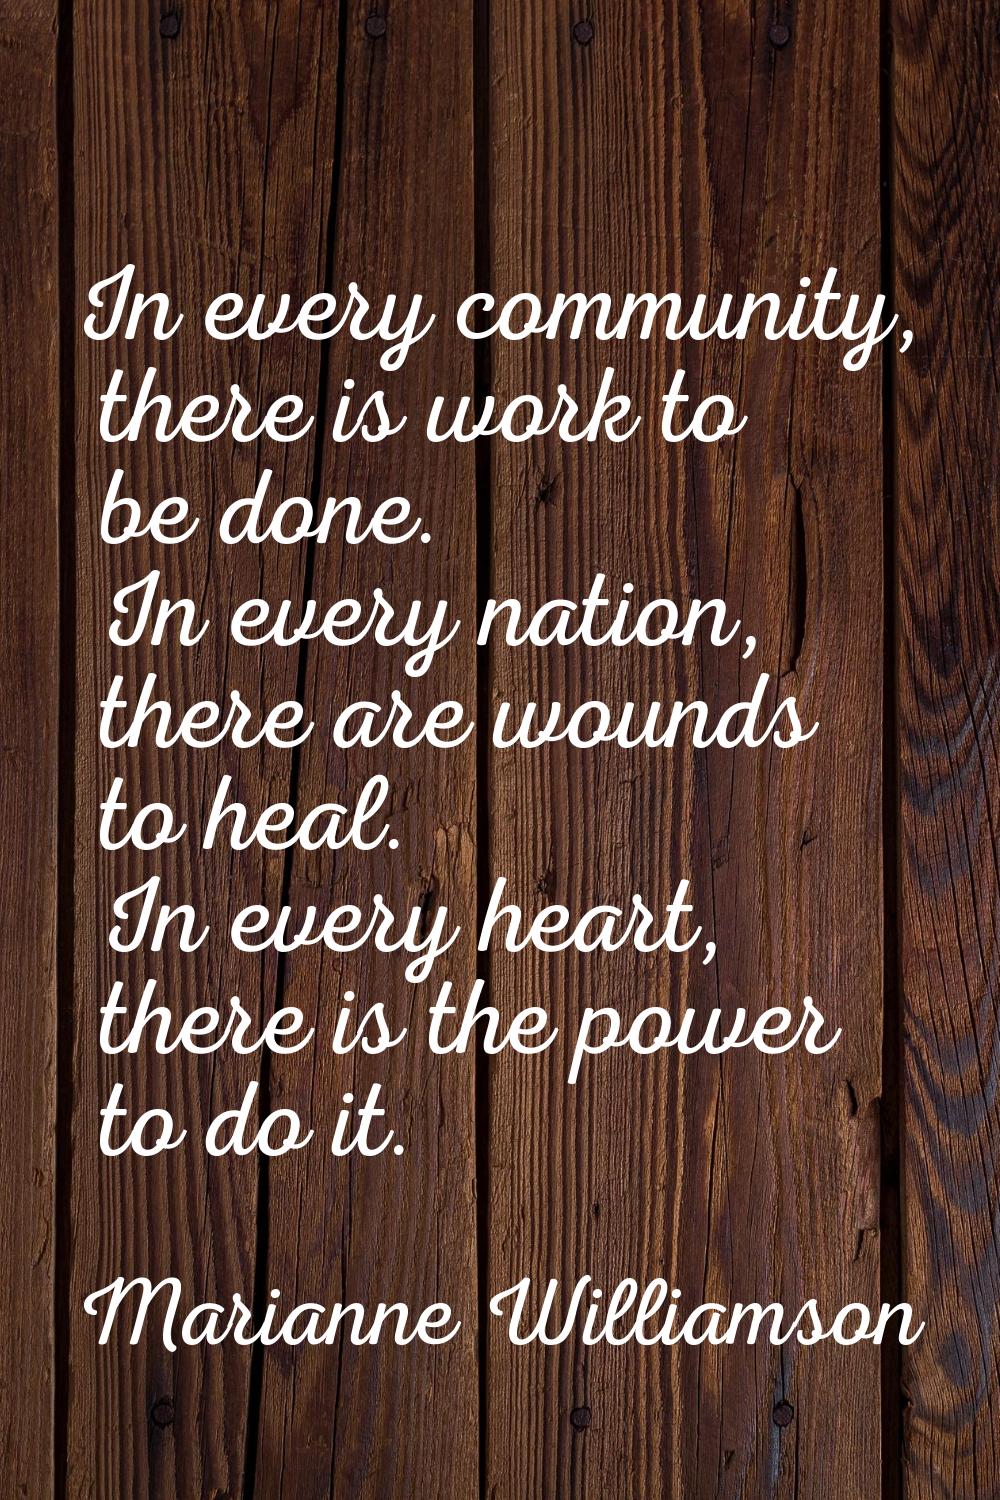 In every community, there is work to be done. In every nation, there are wounds to heal. In every h